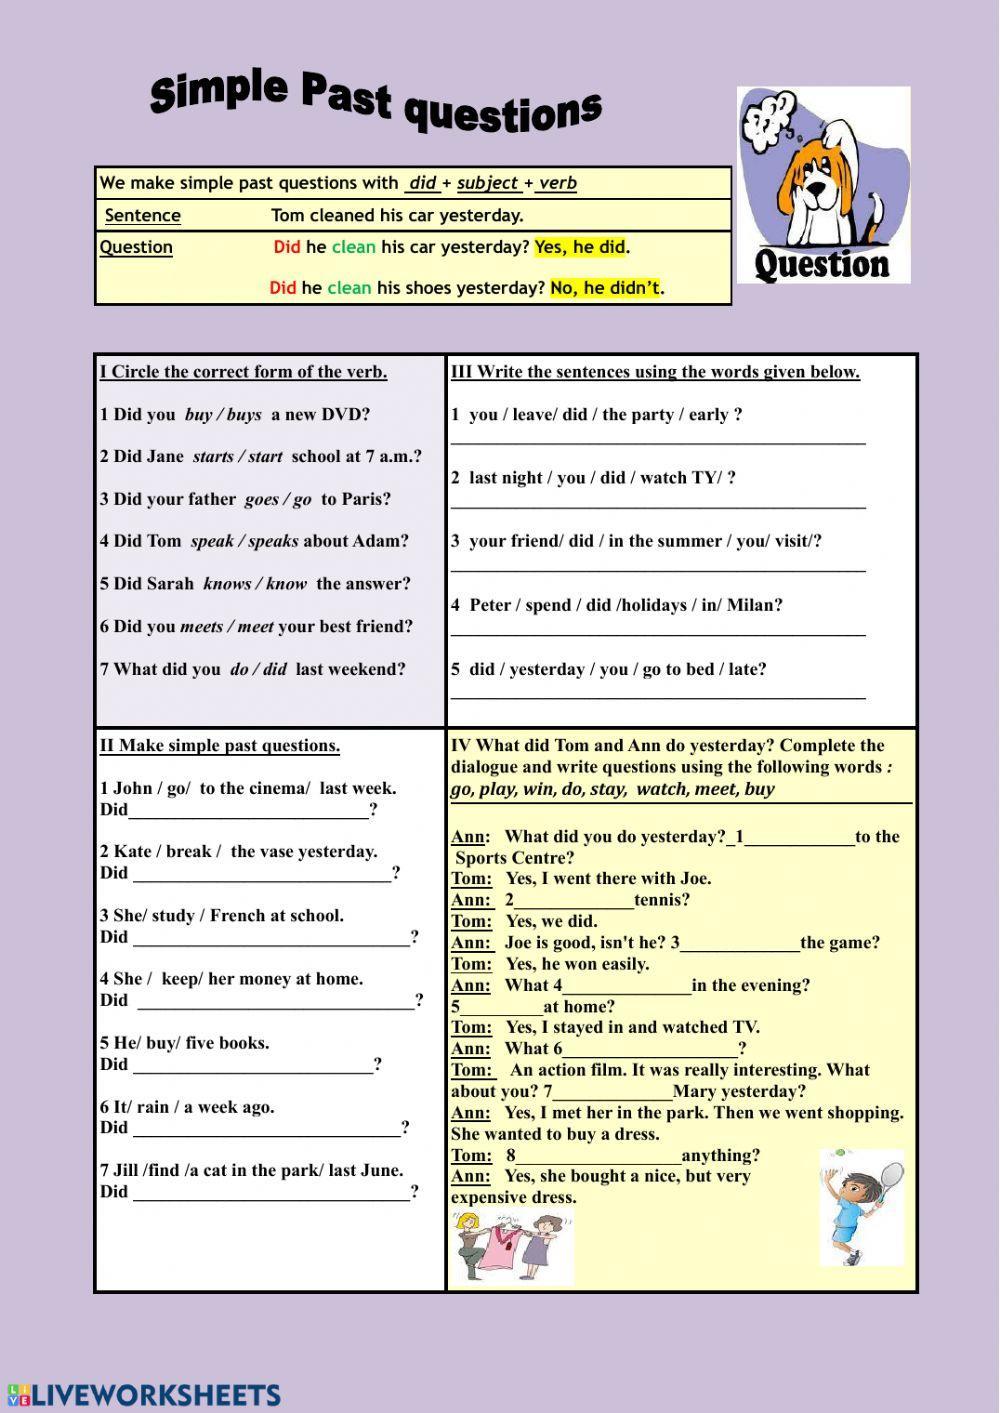 Simple past tense question drills